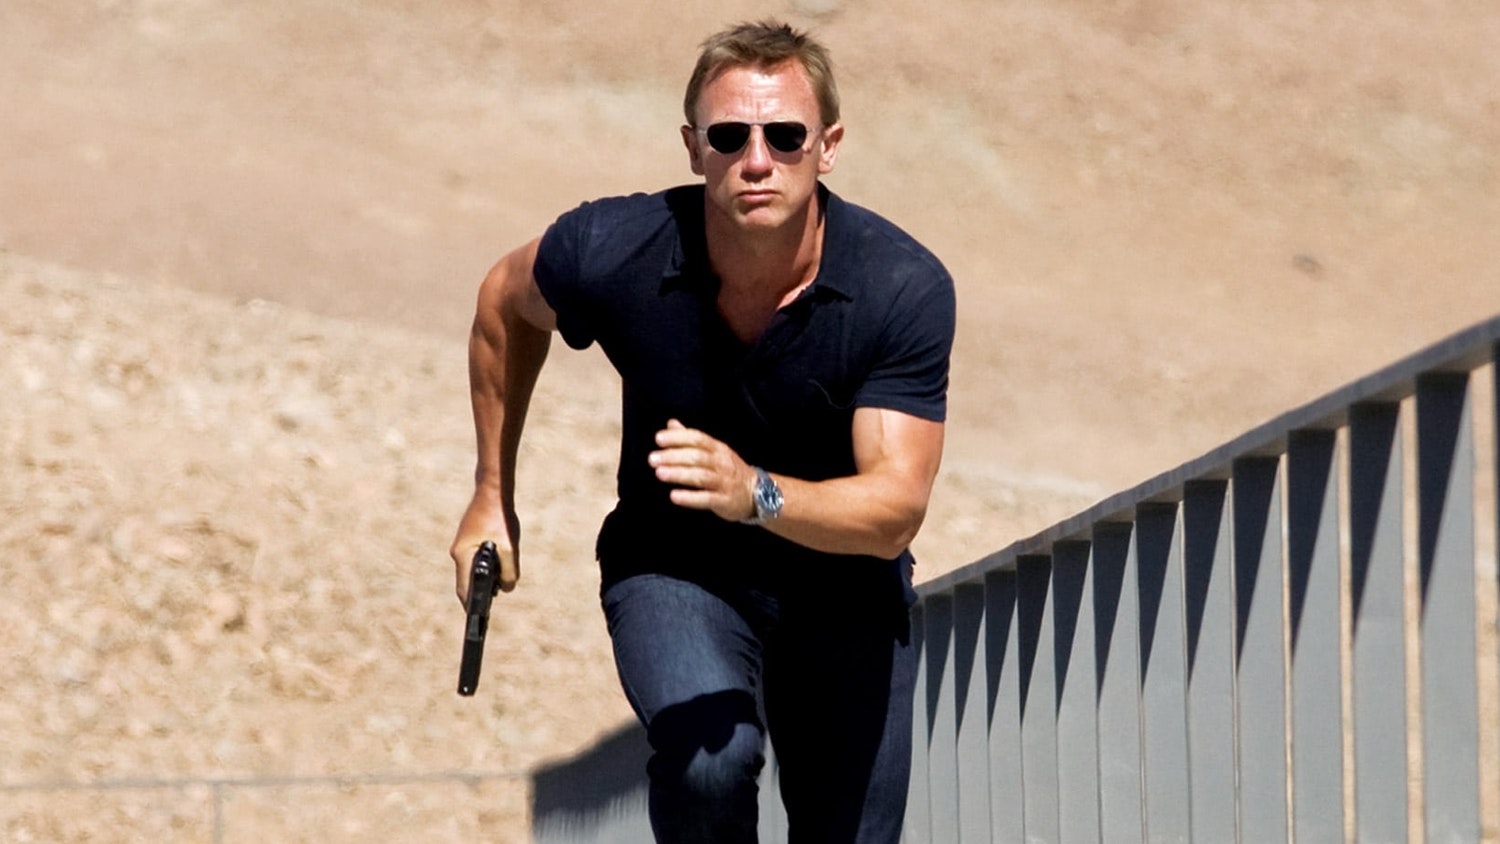 The Making Of Quantum Of Solace: The Original Empire Feature